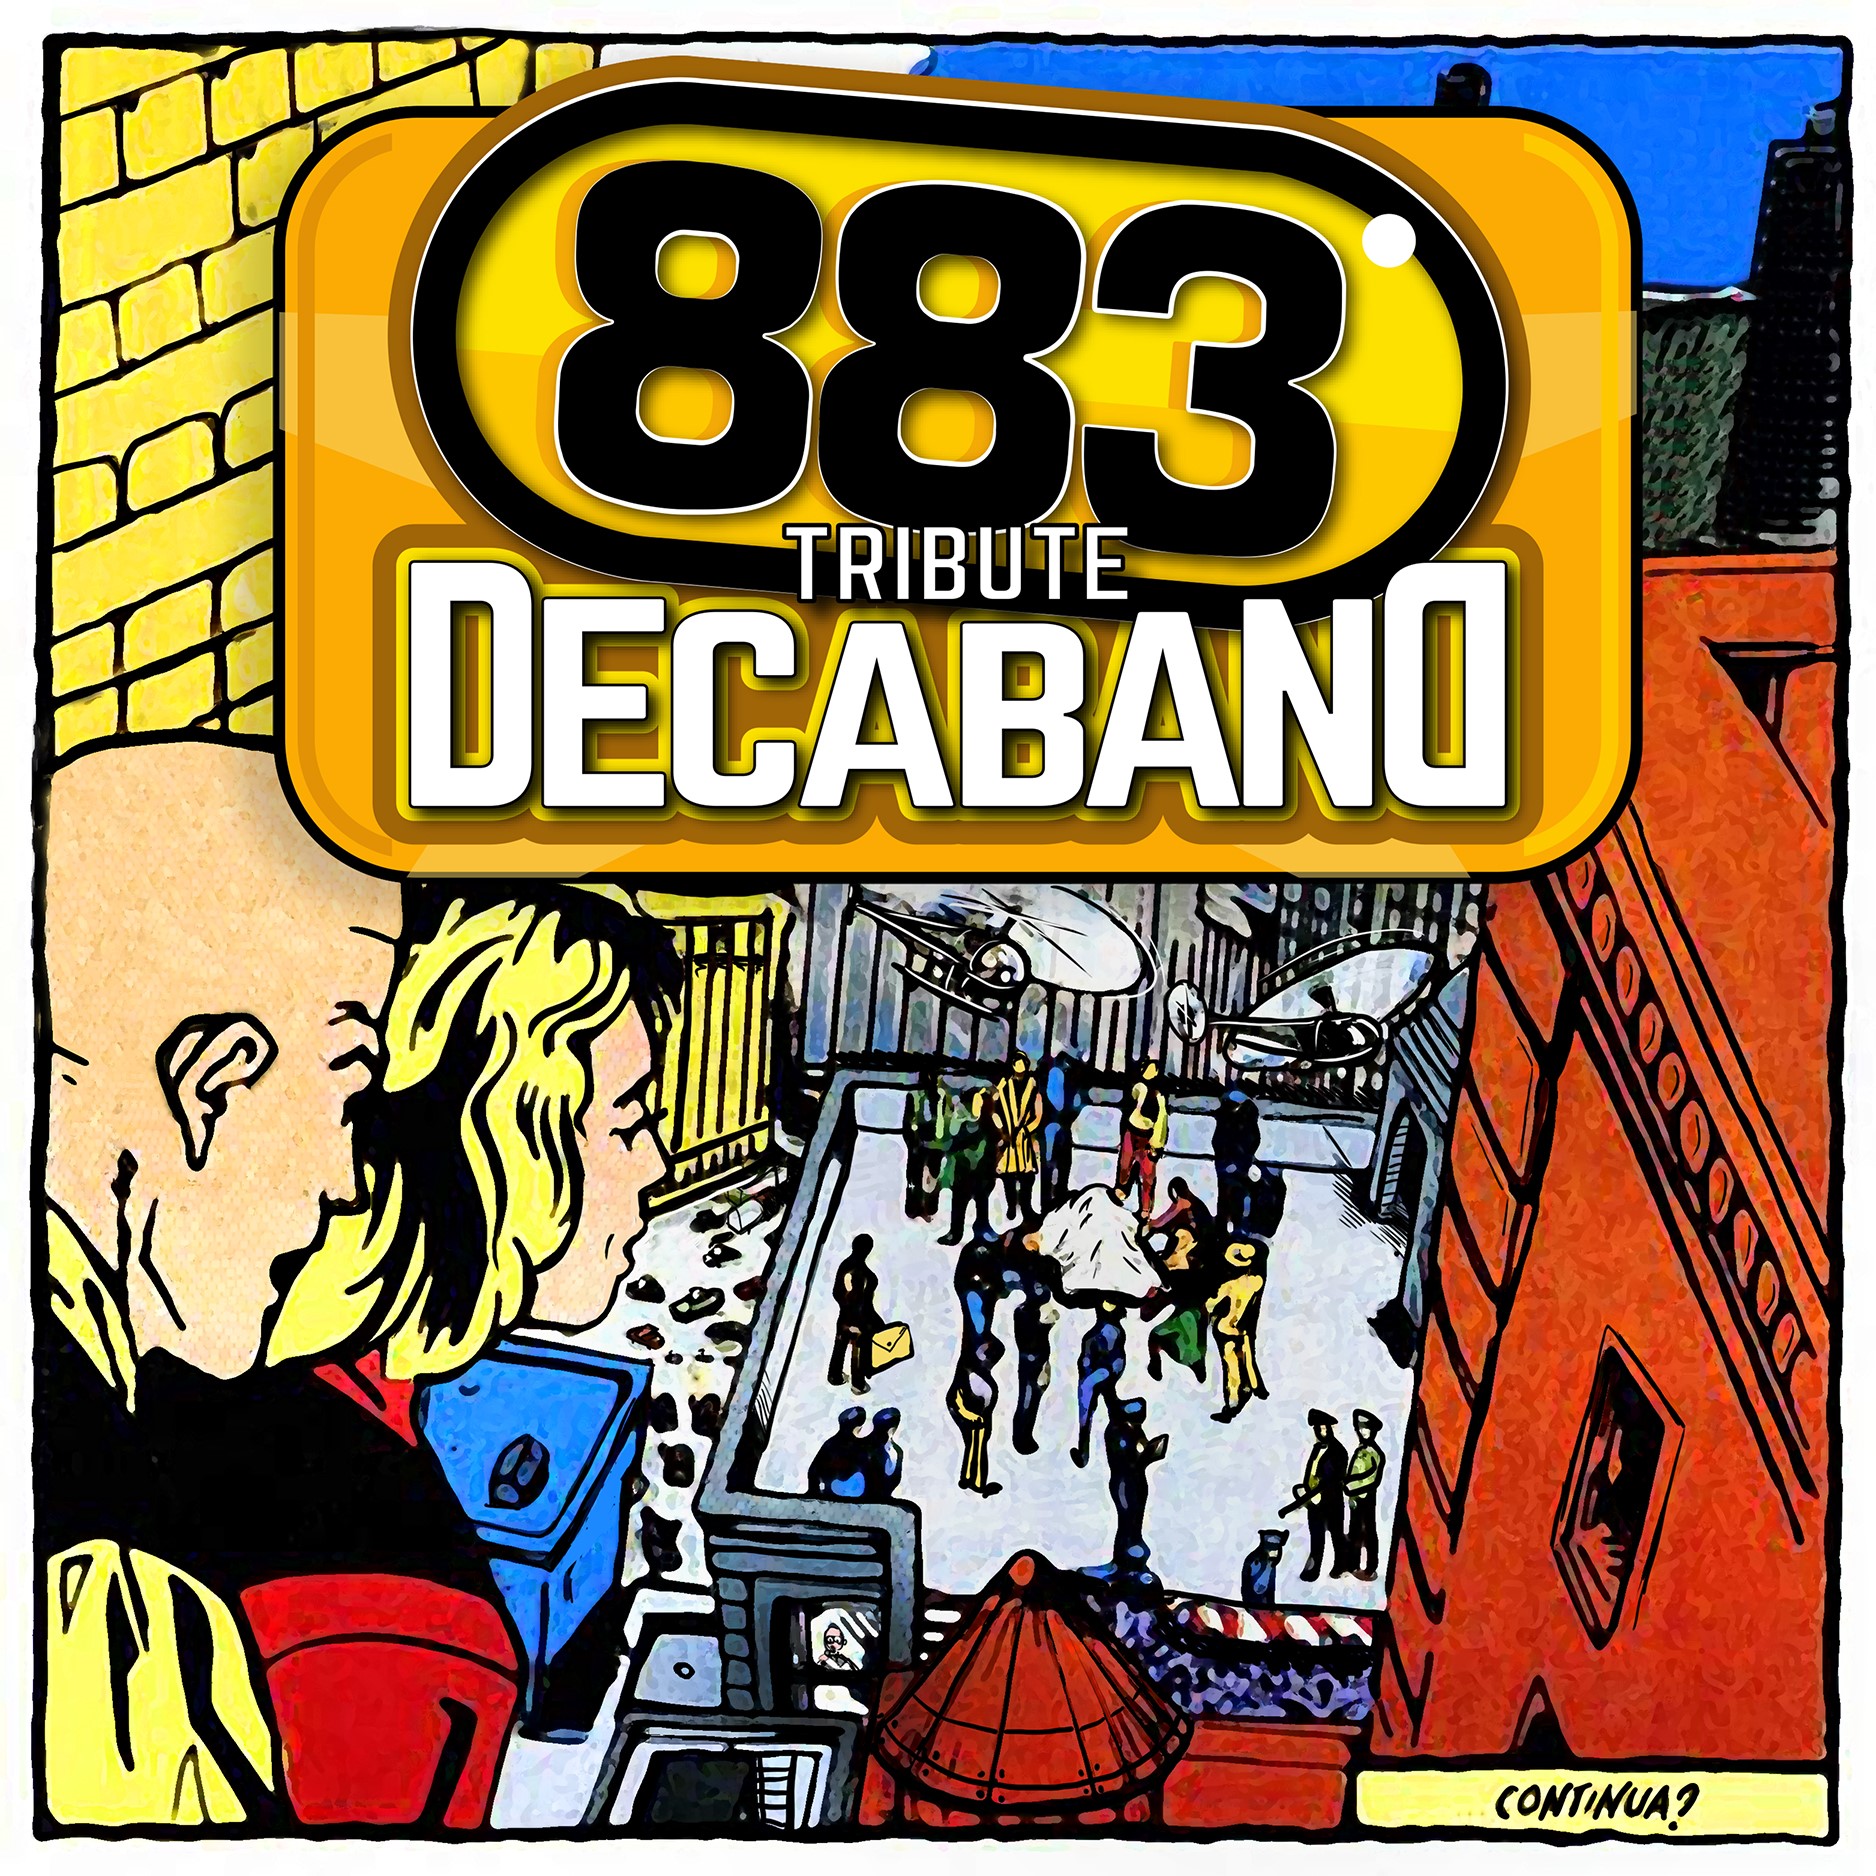 Decaband, cover dei 883